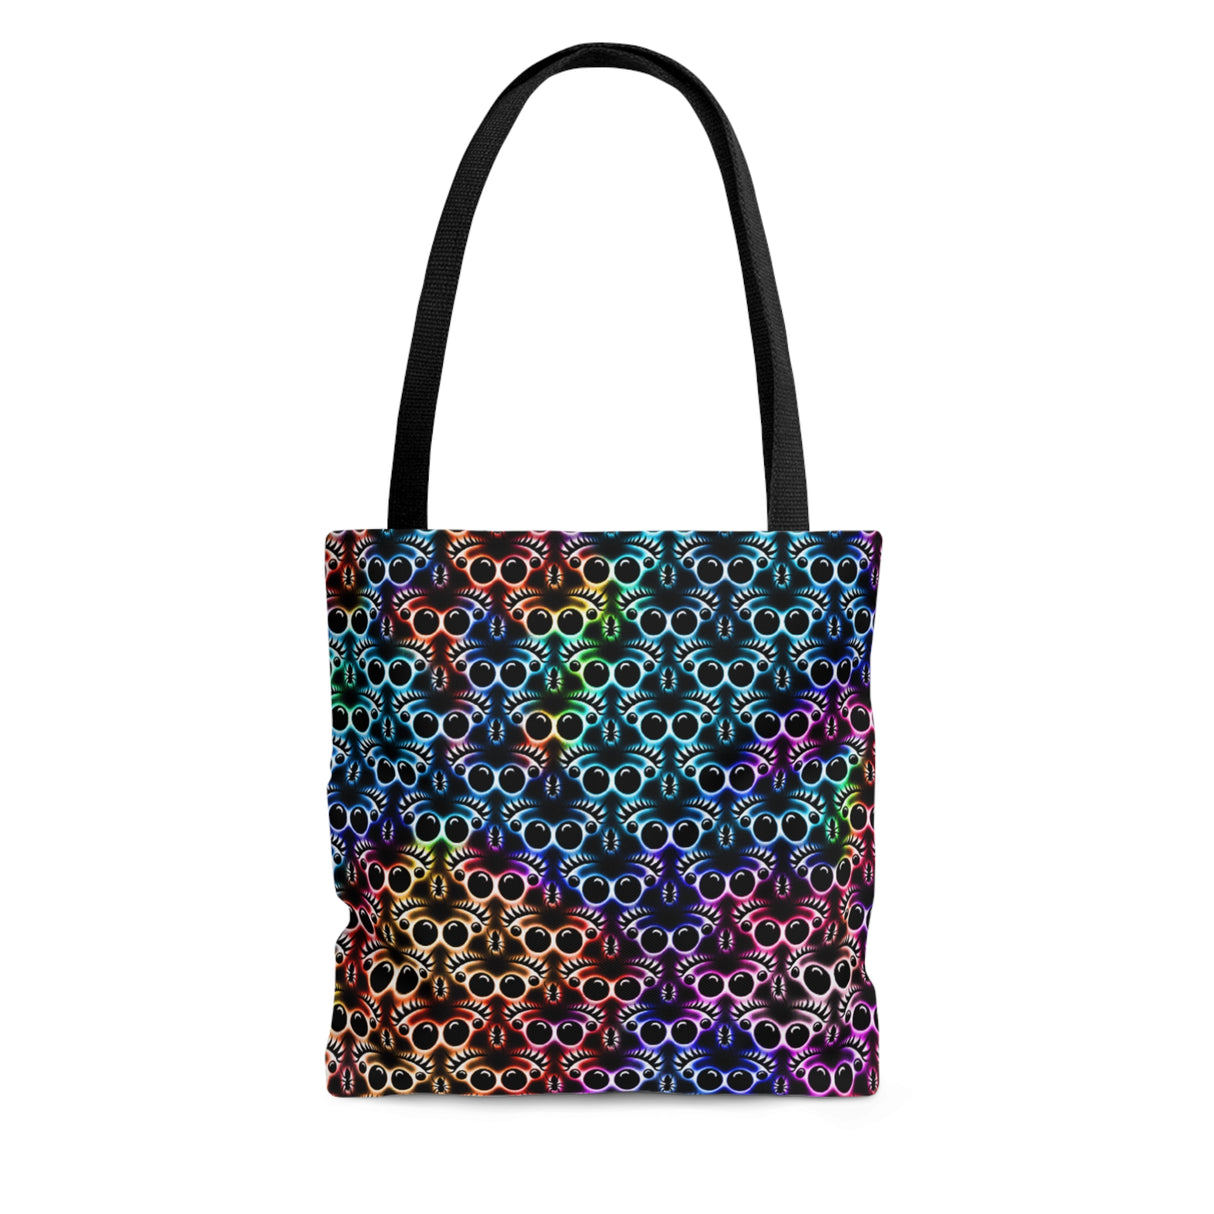 Jumping Spider Tote Bag Featuring Spider Eyes Print  Rainbow